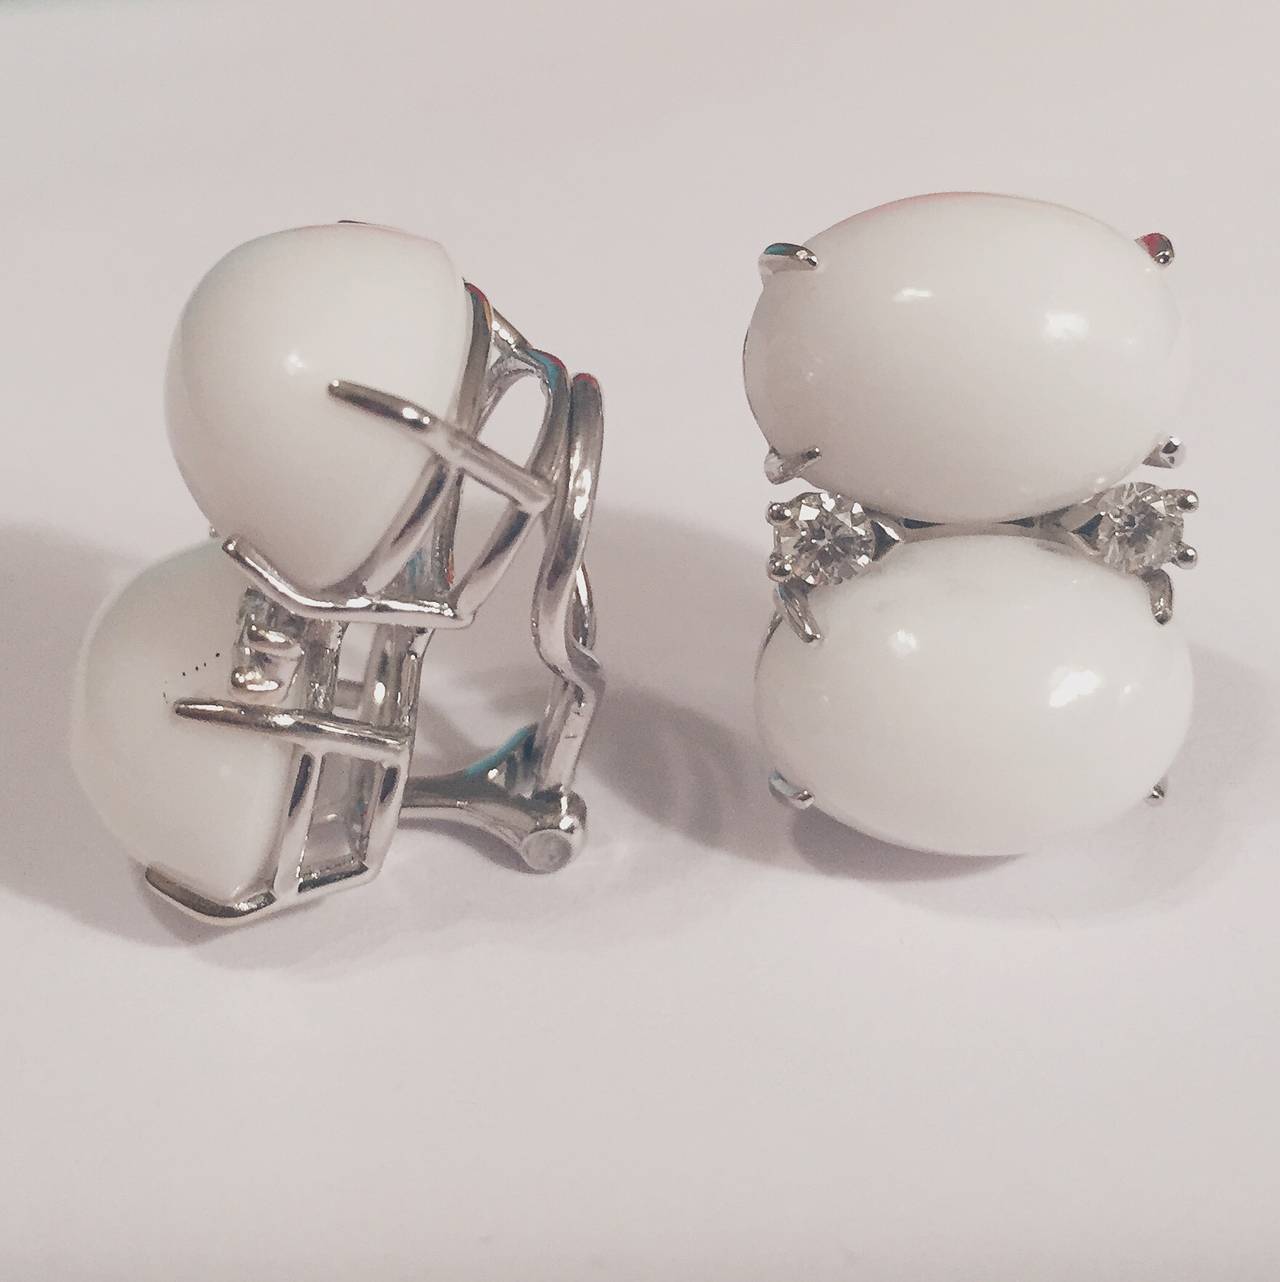 18kt White Gold Grande  GUM DROP™ Earrings with Cabochon White Jade and four diamonds ~-.60cts - The biggest of the Collection!

Both stones are of equal size - measuring 5/8